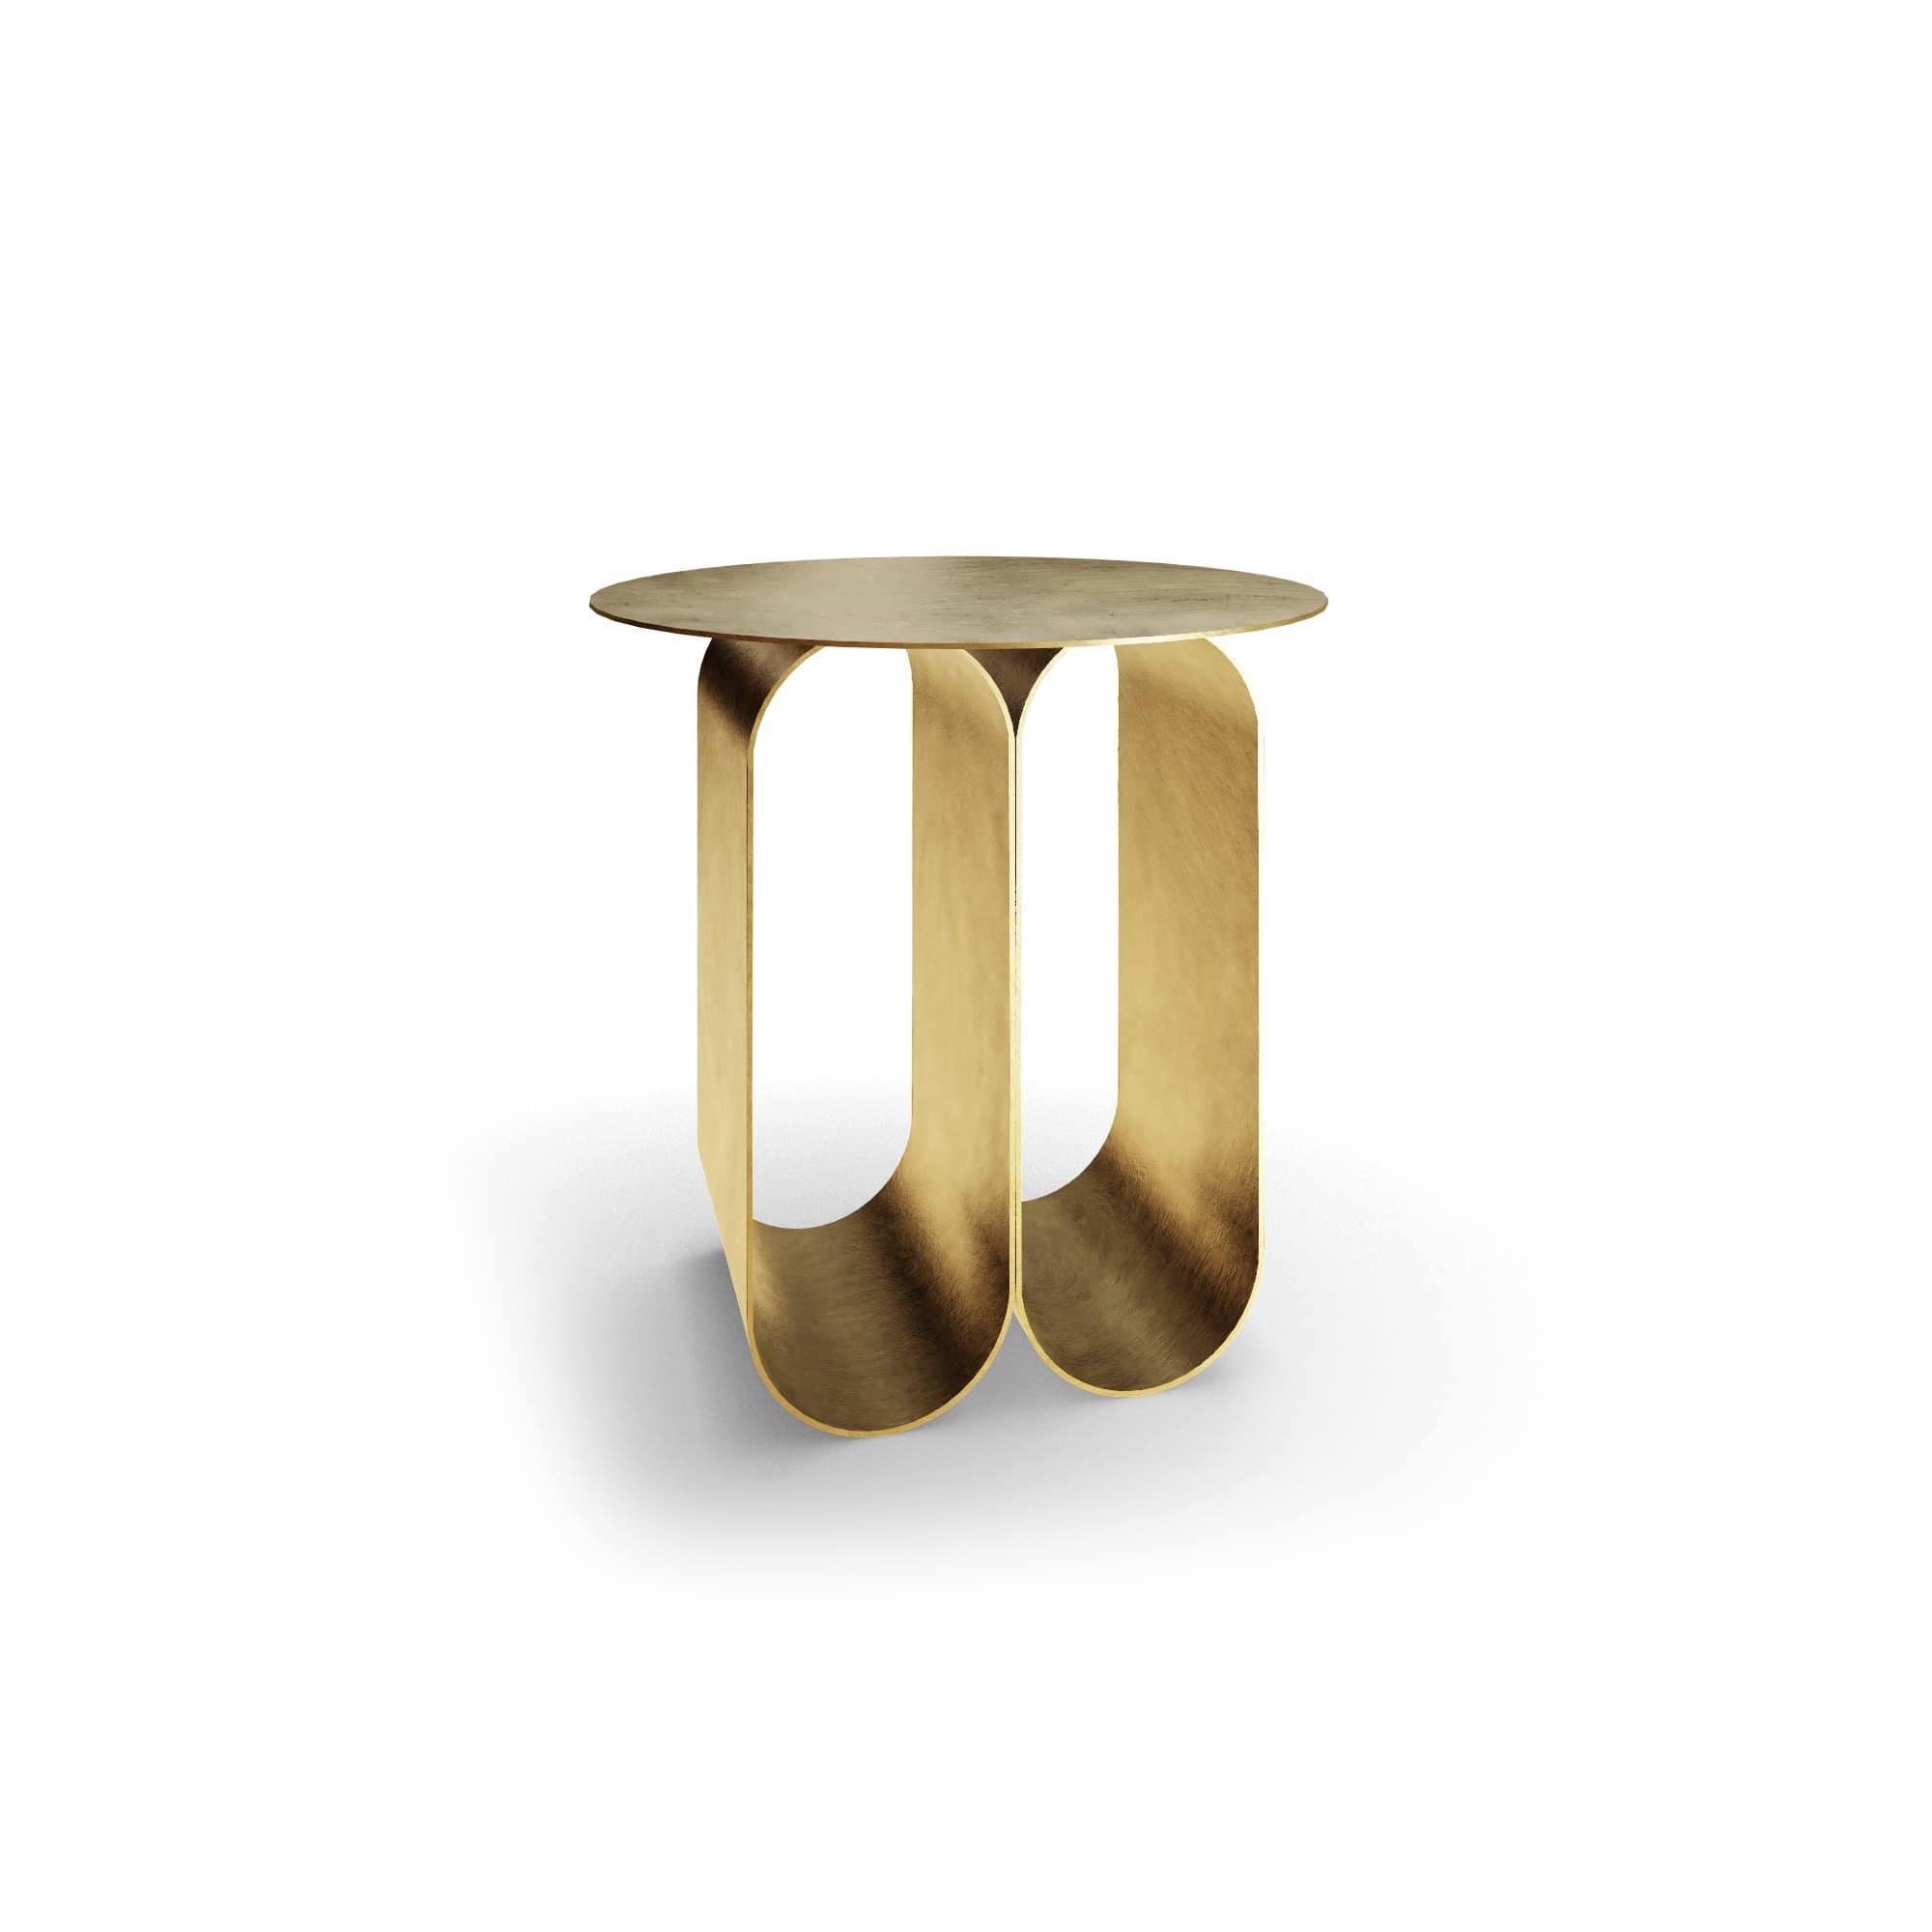 The Arcade coffee table - 2 arches round version - gold, has been created By Kasadamo in collaboration with Pierre Tassin, french designer. This table reflects a mix between old and futuristic architecture. Its identity is found in the arched legs,